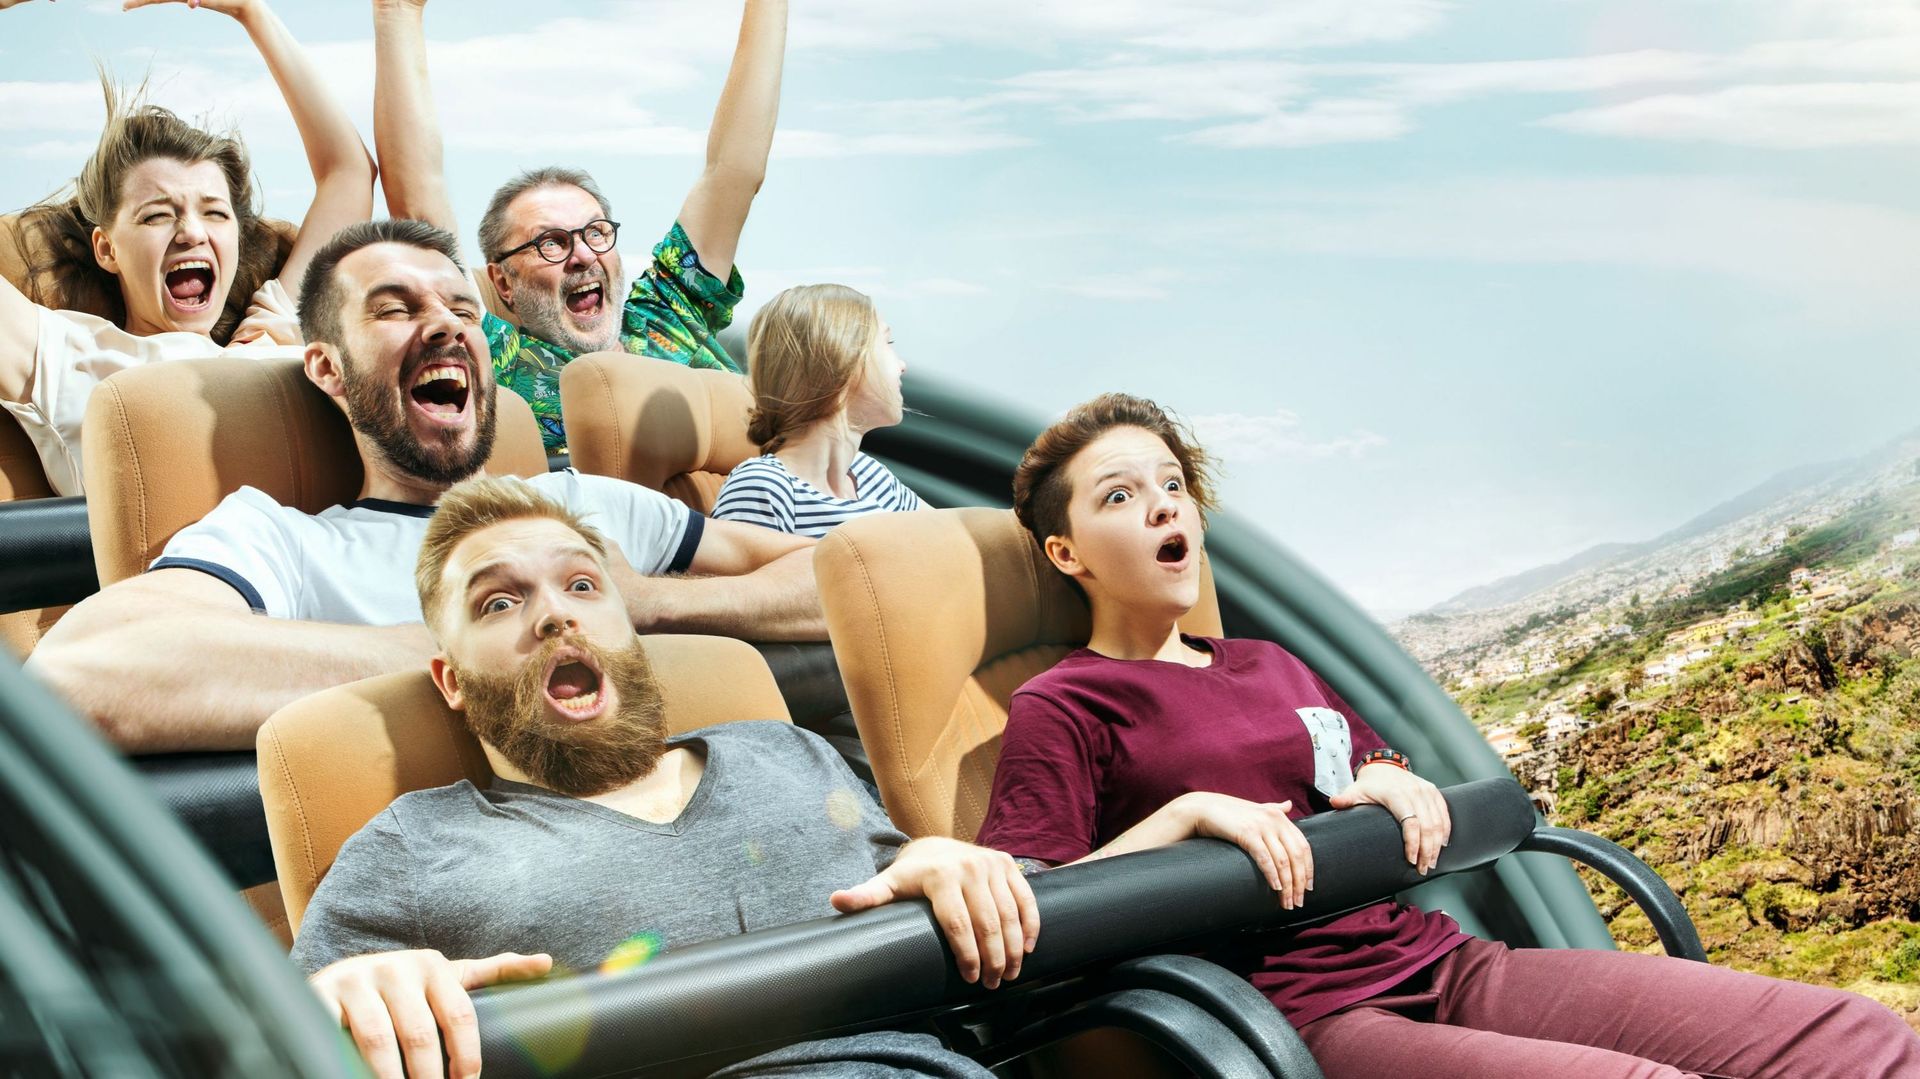 The happy emotions of men and women having good time on a roller coaster in the park